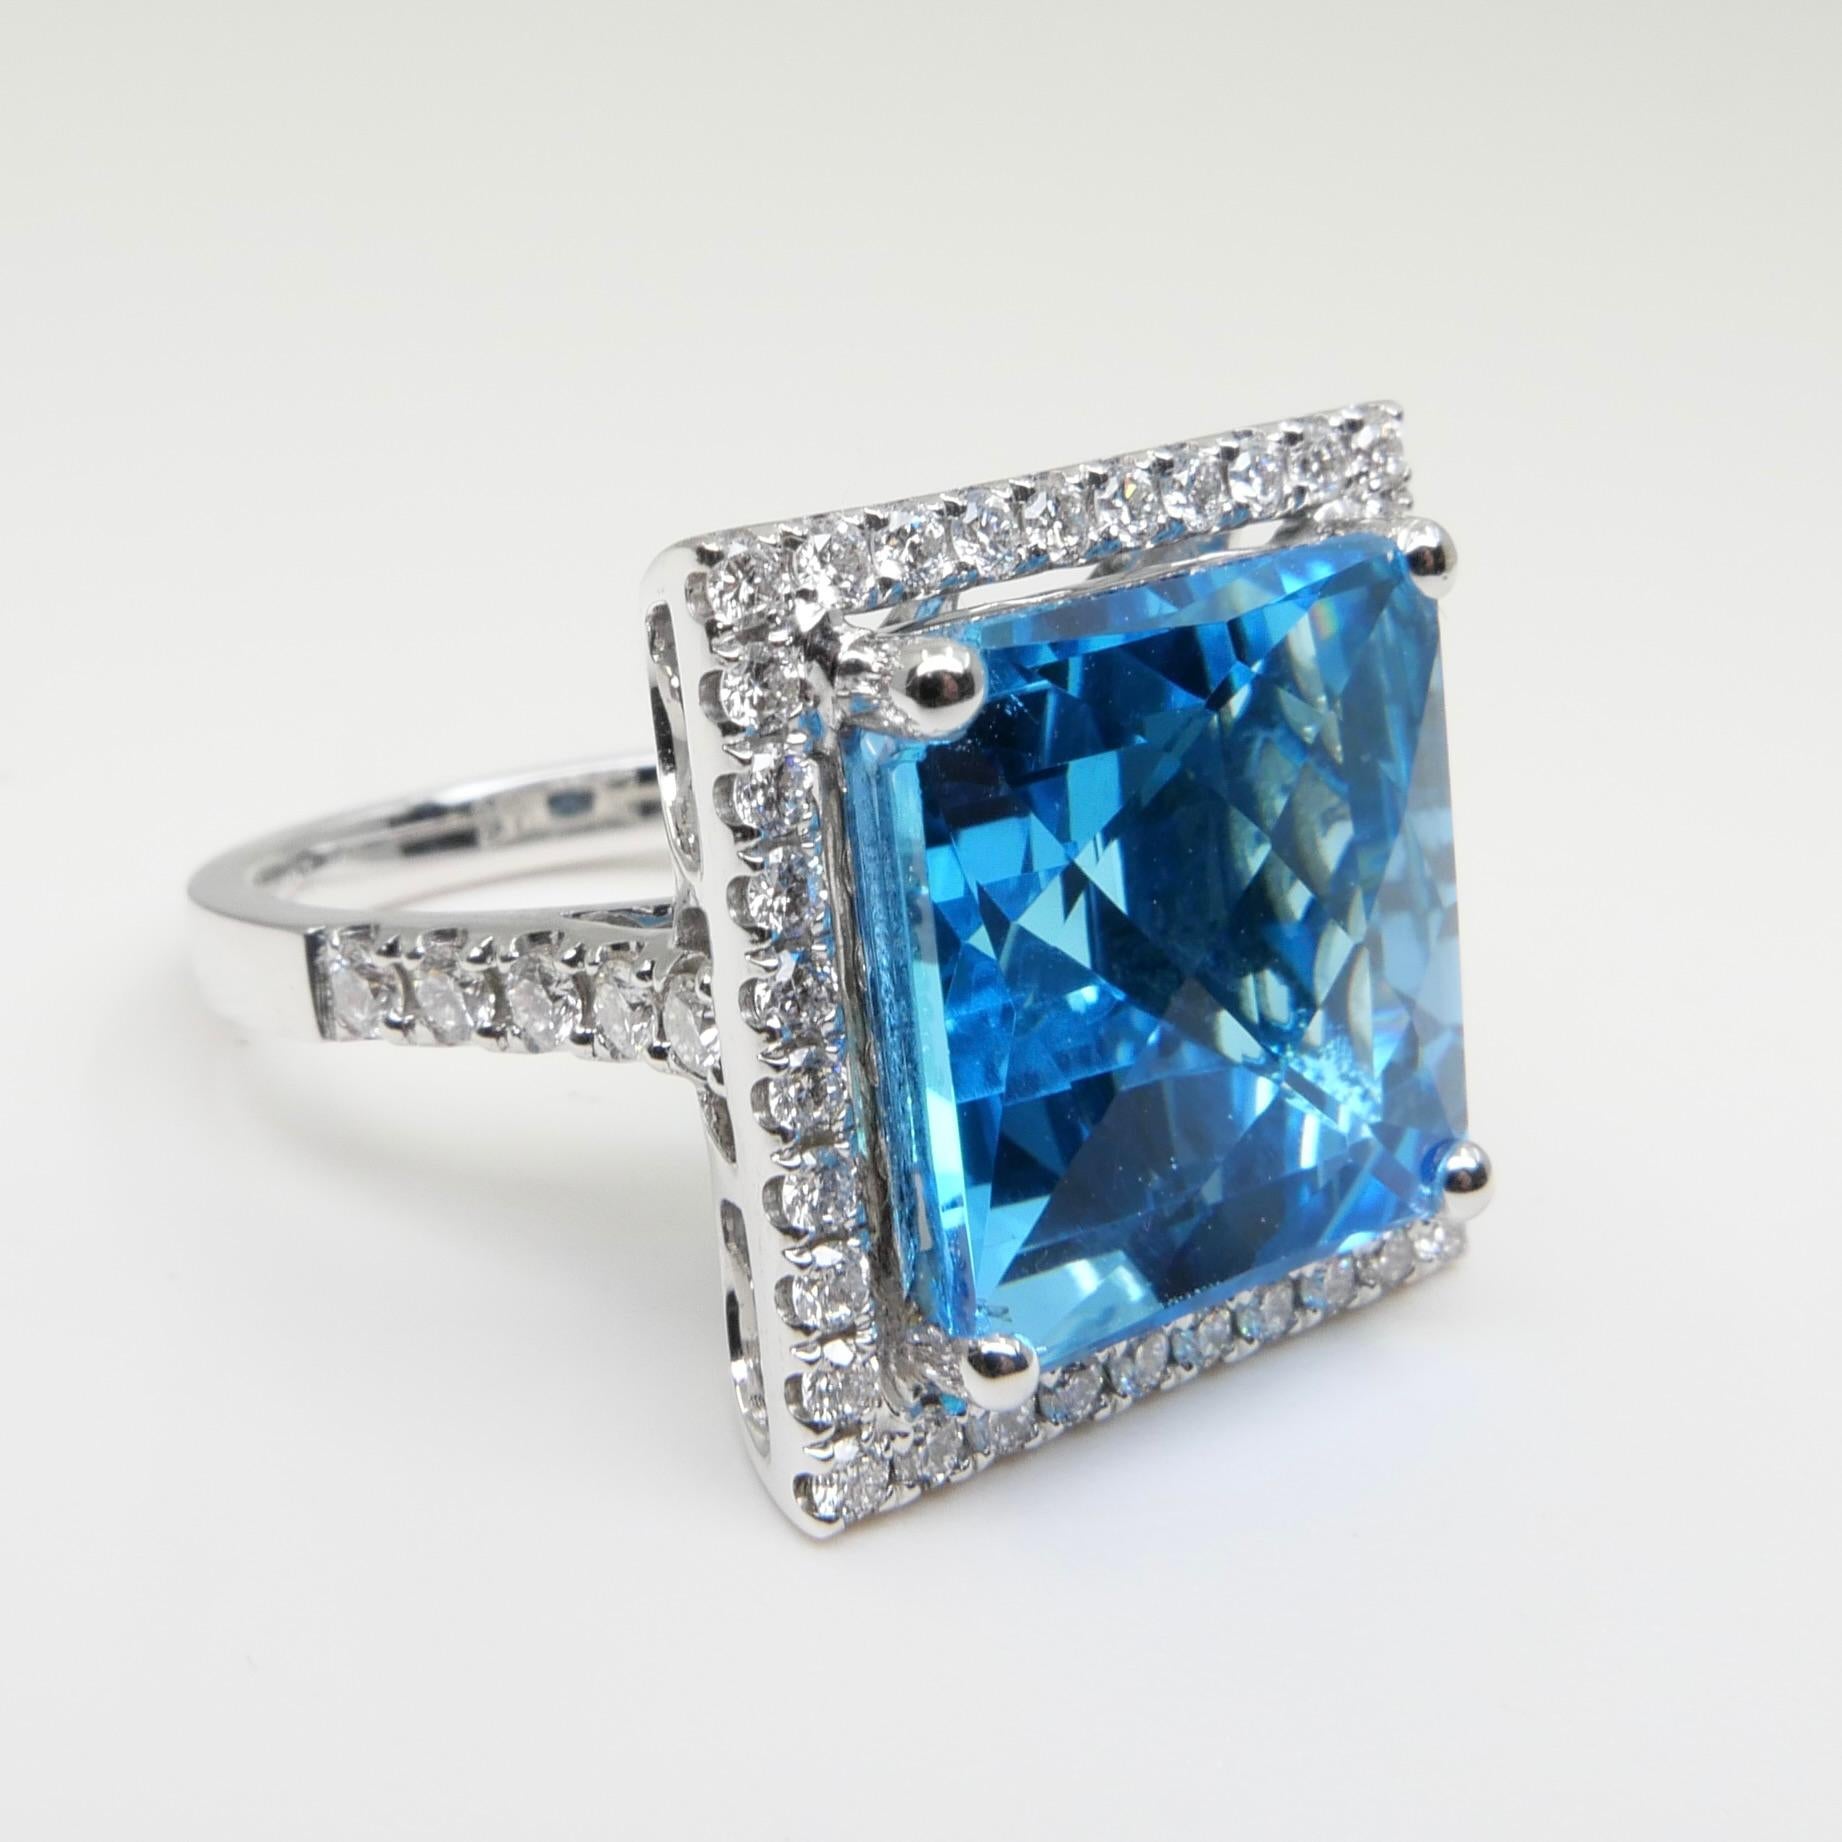  13 Cts checker Square Cut Blue Topaz & Diamond Cocktail Ring. Big Statement. For Sale 5